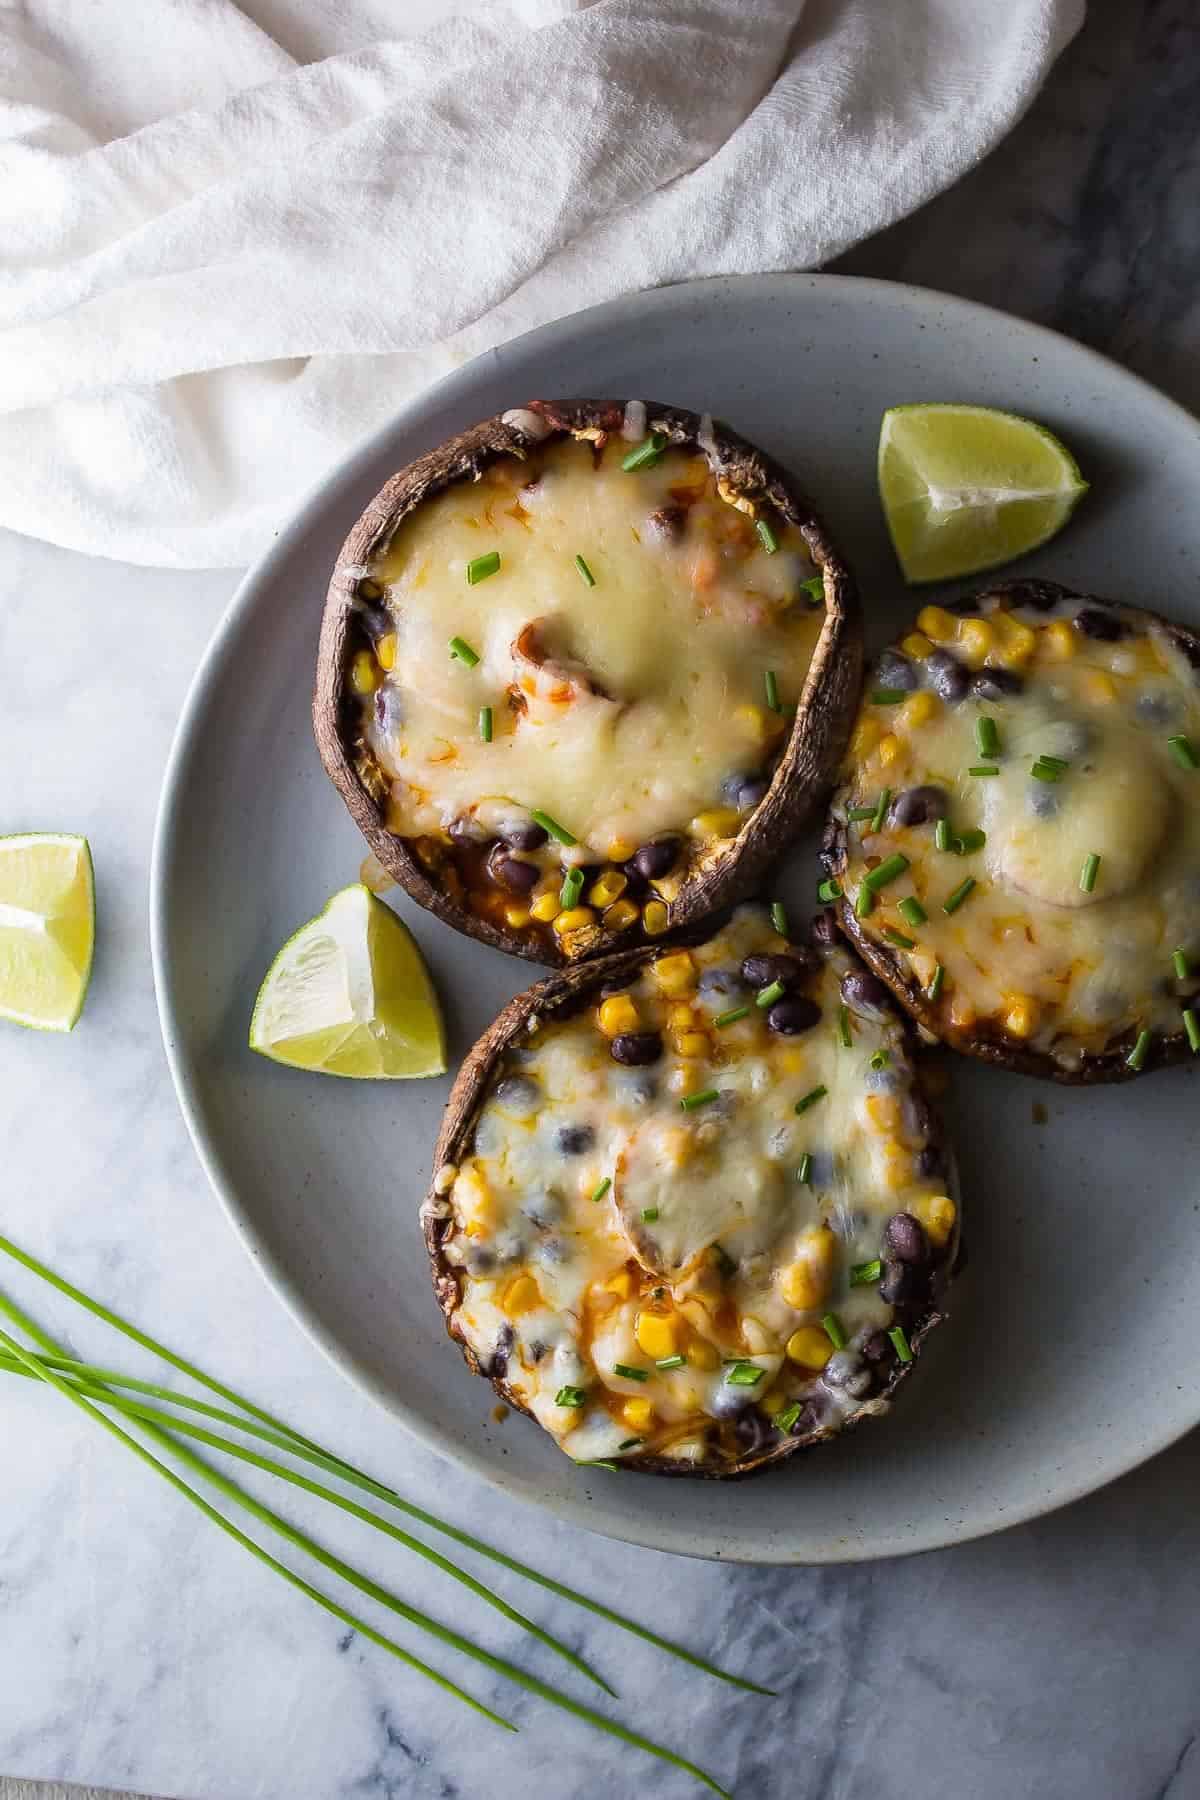 These Enchilada Stuffed Grilled Portobello Mushrooms are an easy vegetarian dinner recipe that is ready in under 25 minutes!